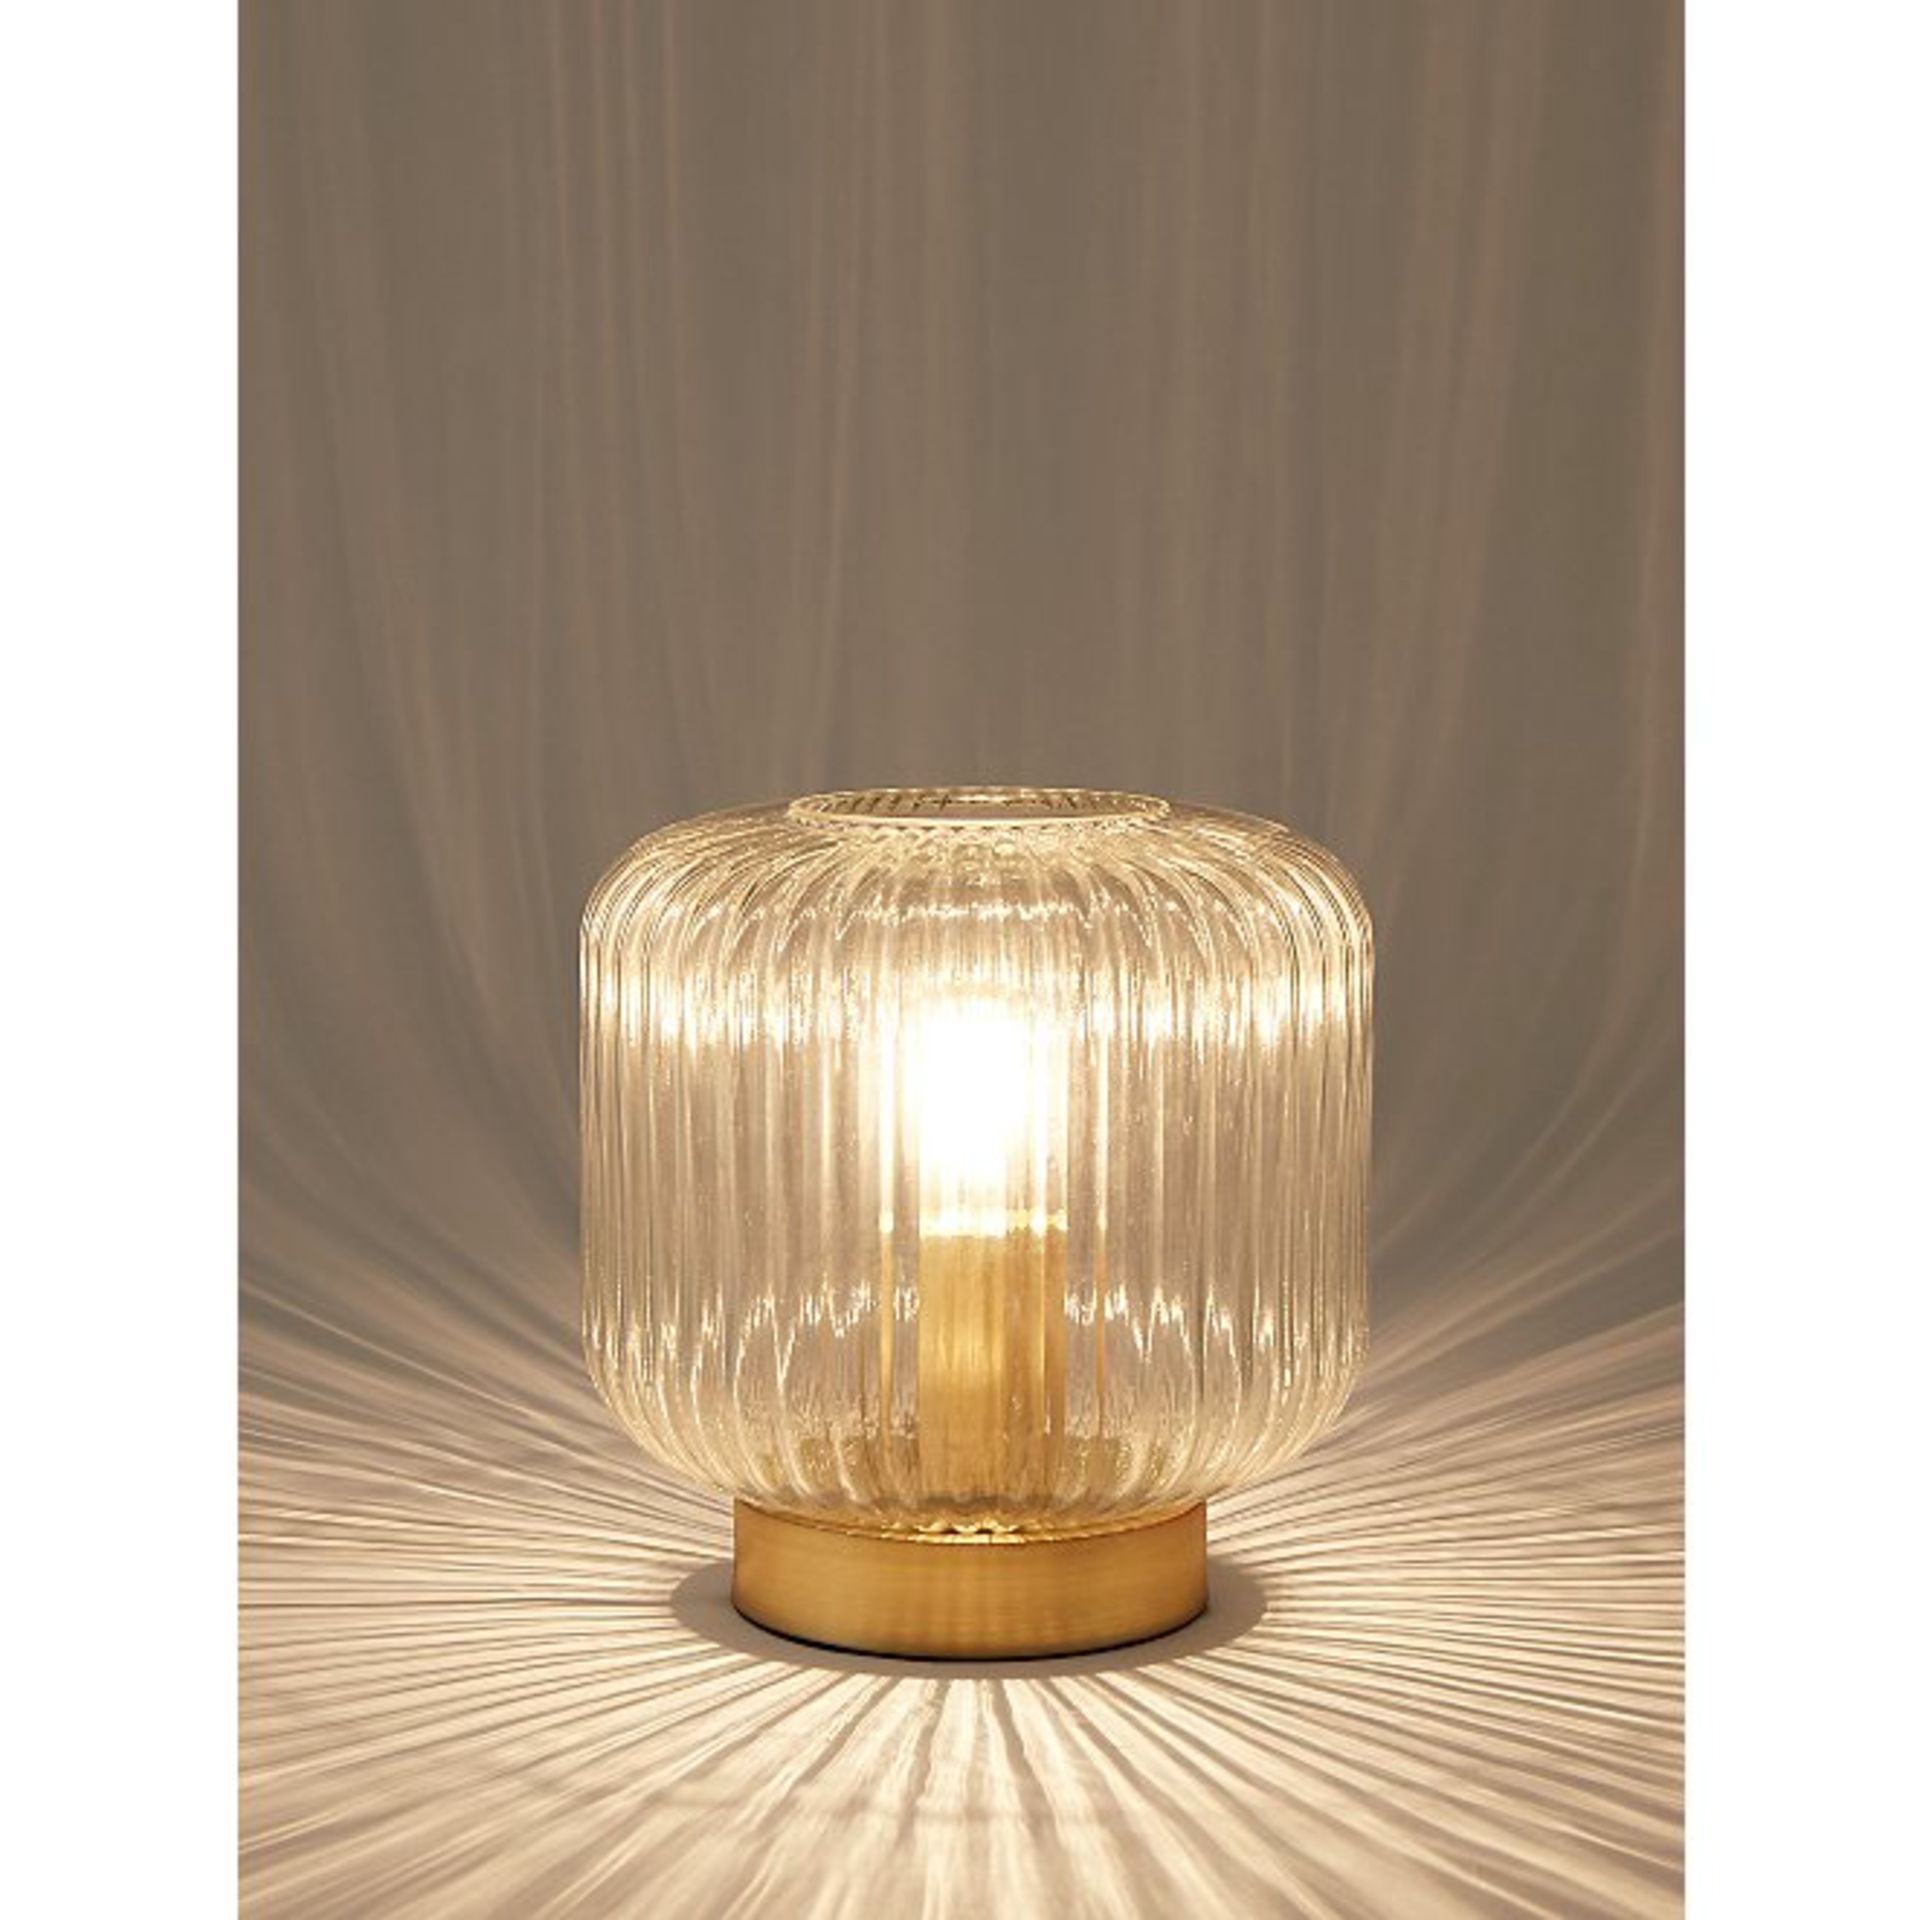 (R6A) Lighting. 3 X Ribbed Glass Lamp. (May Contain Undelivered / Wrong Item Return Sticker)